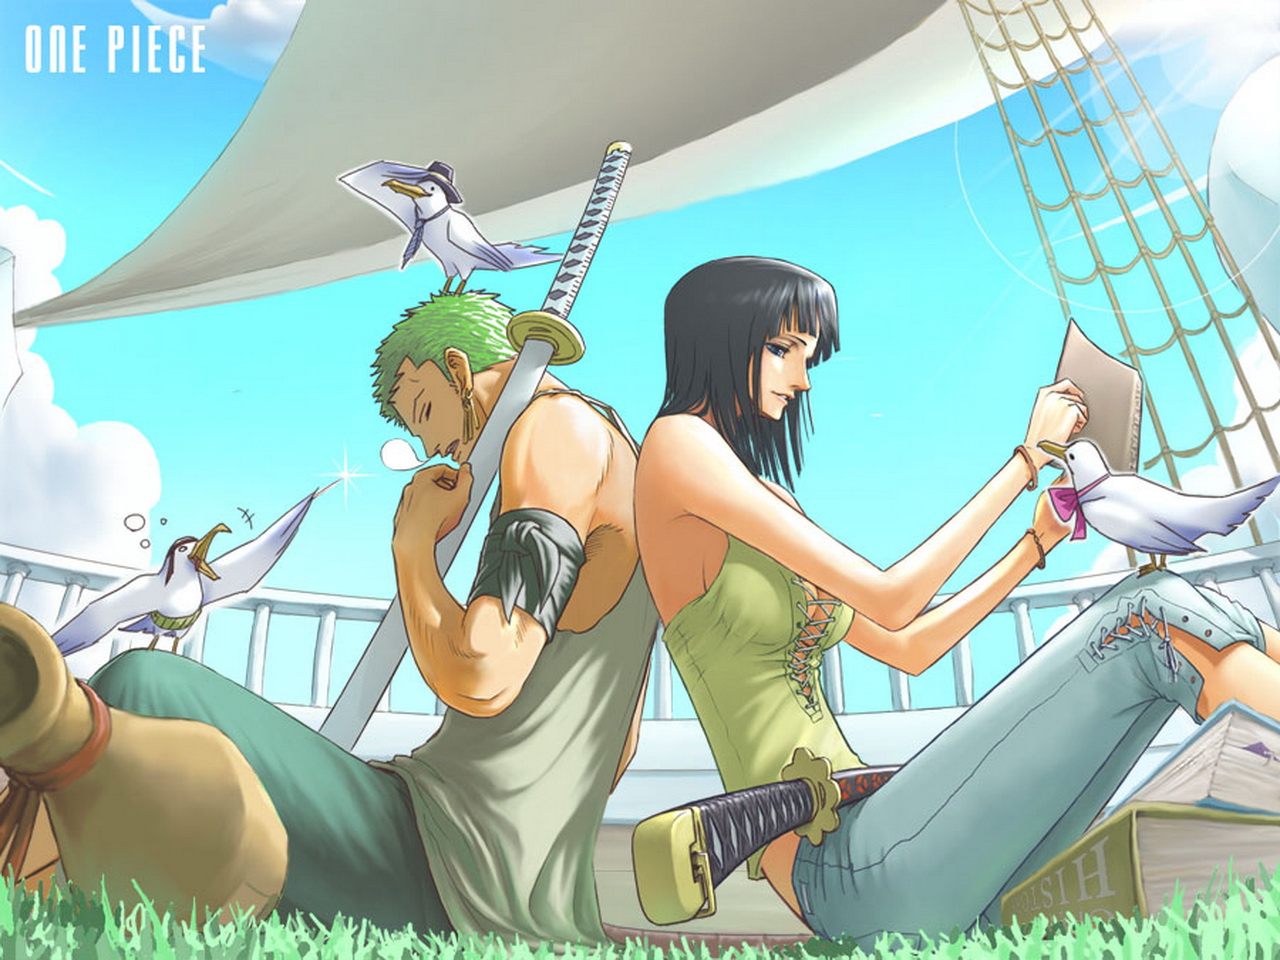 Desktop Backgrounds Book anime, one piece, bandage, green hair